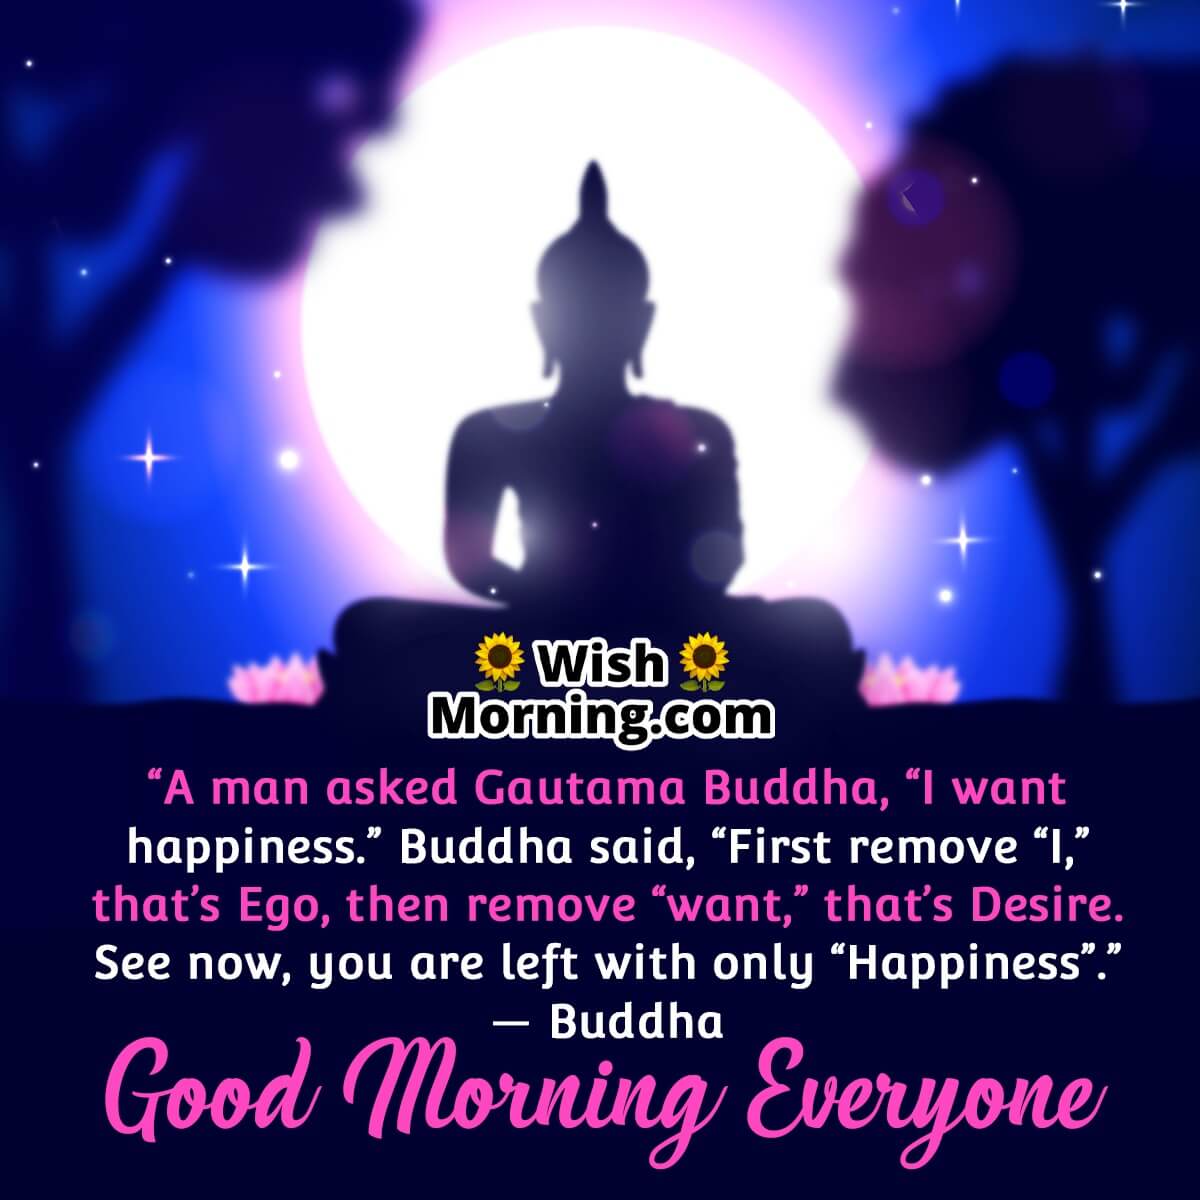 Good Morning Buddha Quotes On Happiness